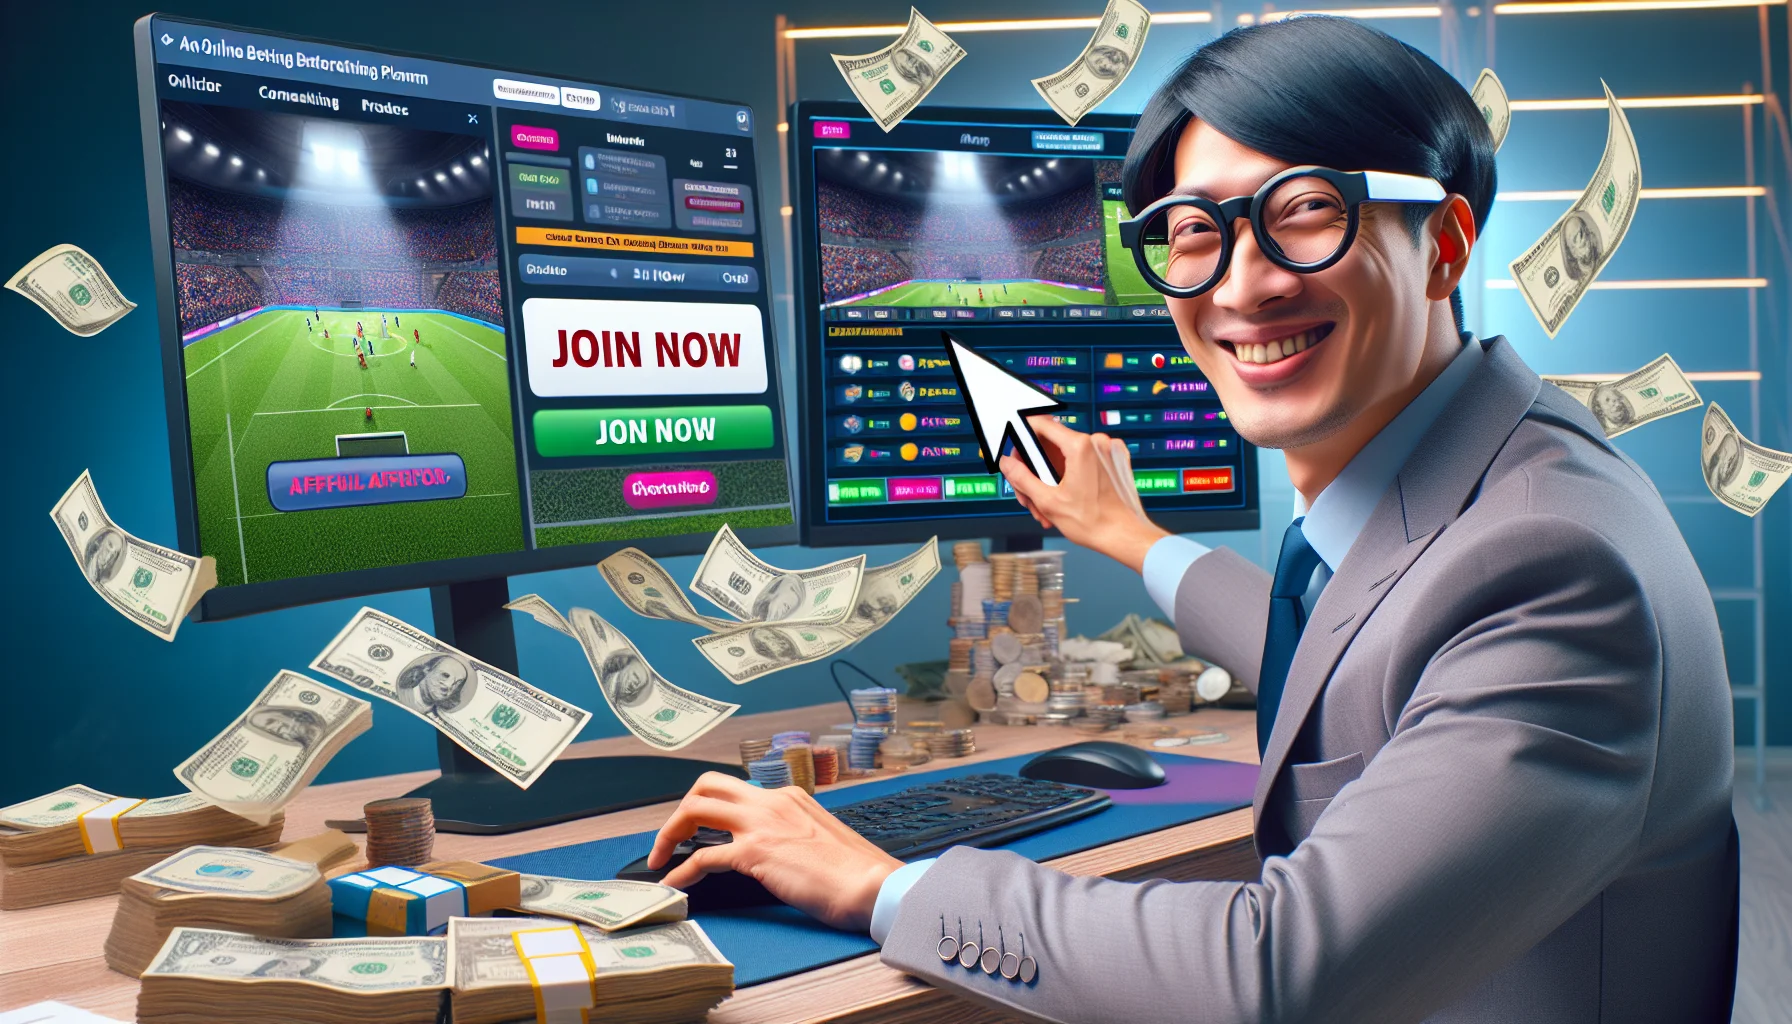 Create a humorous yet realistic image of a person acting as an affiliate for an unspecified online betting platform. This person, an Asian male in his 30s with a friendly smile and glasses, is sitting at a contemporary office setup. He has multiple screens displaying various sports games, a pile of banknotes clearly visible on one side of his desk, and an oversized mouse pointer hovering over the 'Join Now' button on one of his monitors. The screens are making the room glow with a mixture of bright and dramatic colors, signifying the excitement associated with online betting platforms and potential earnings.